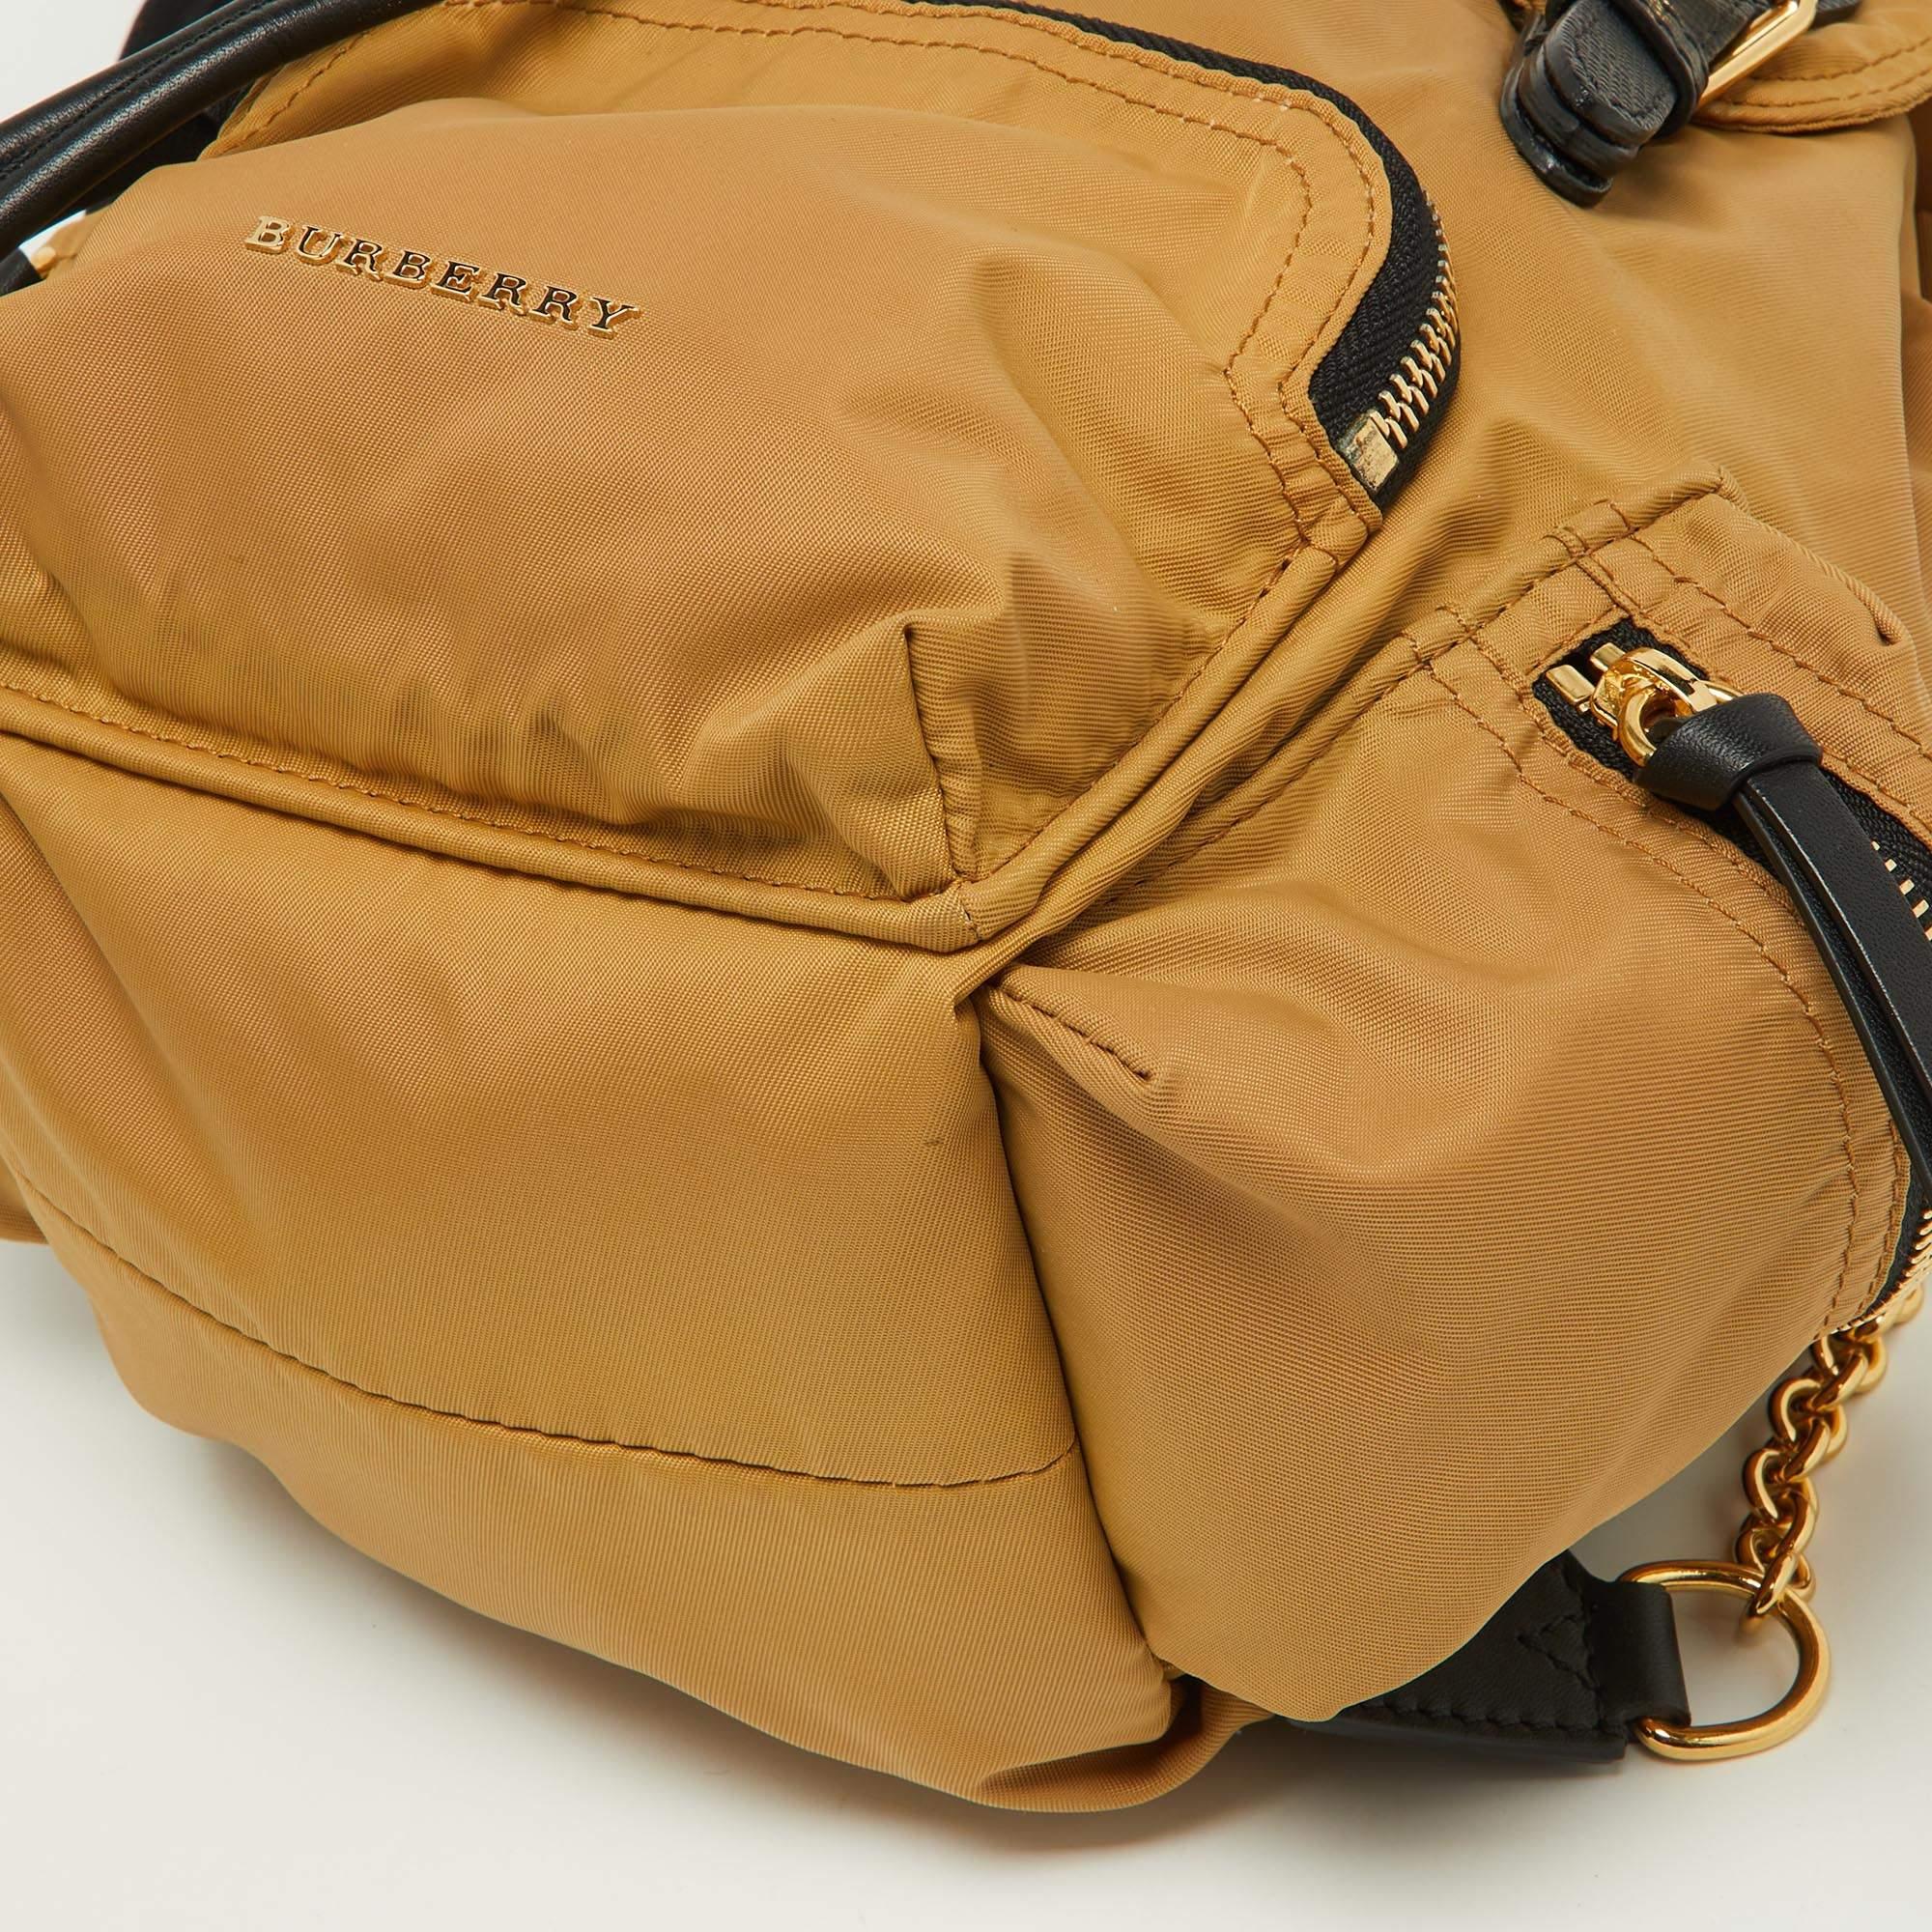 Burberry Beige/Black Nylon and Leather Small Rucksack Backpack 3